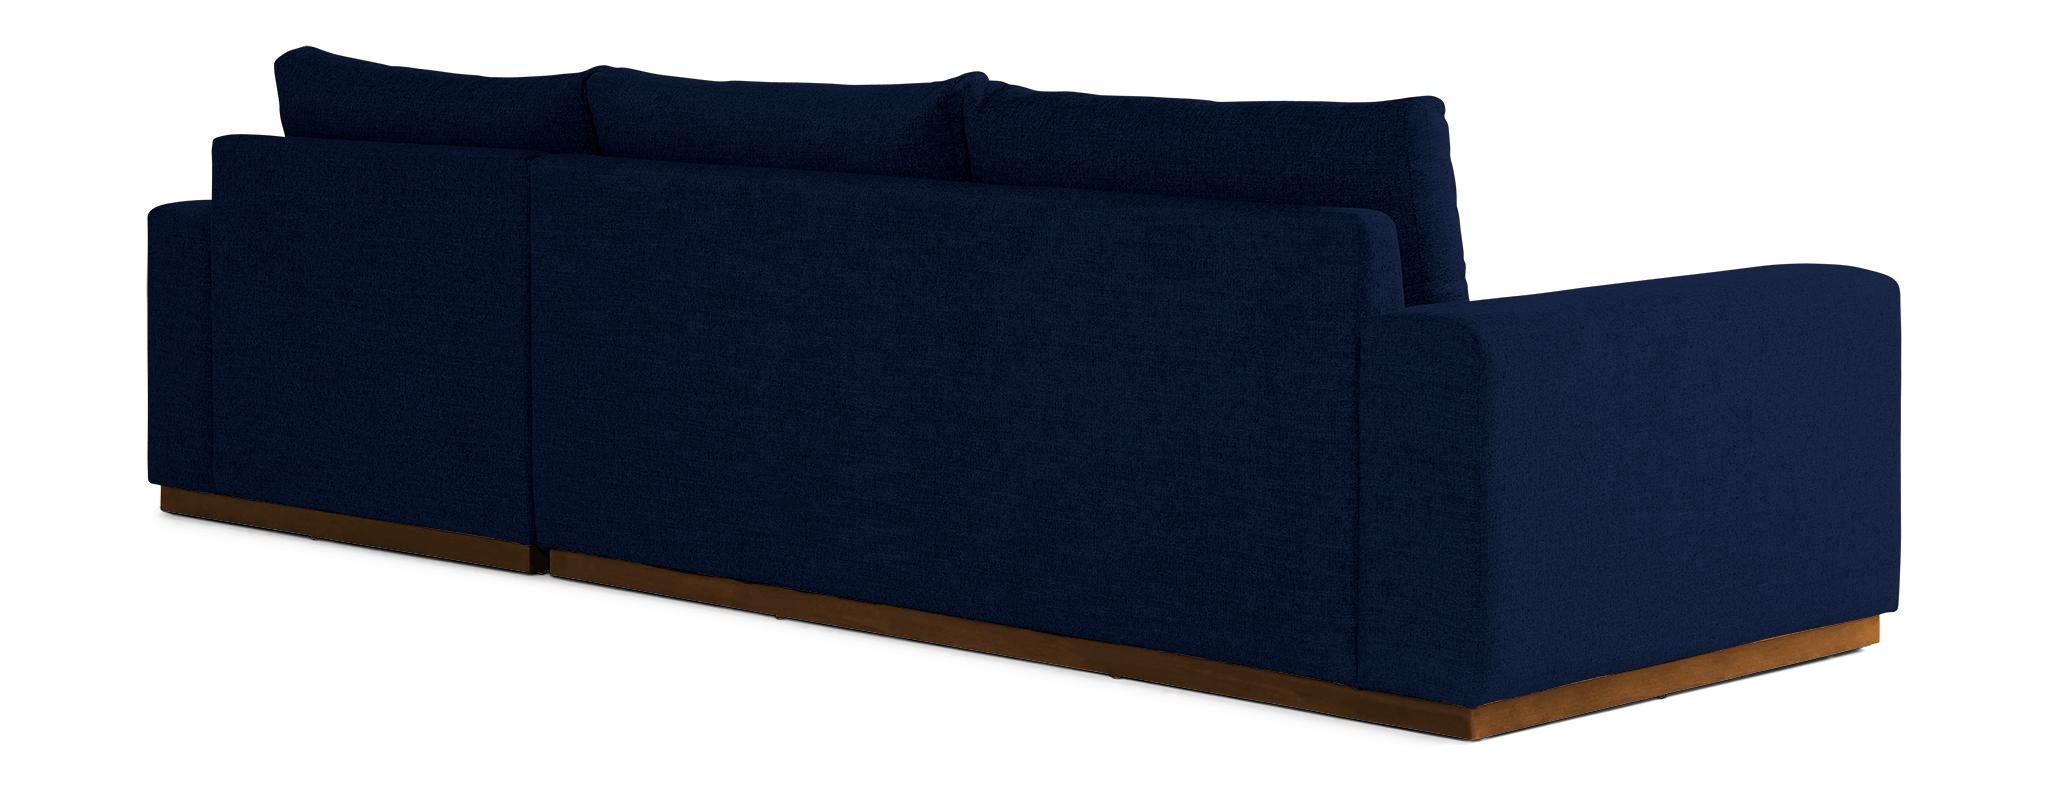 Blue Holt Mid Century Modern Sectional with Storage - Royale Cobalt - Mocha - Right - Image 3